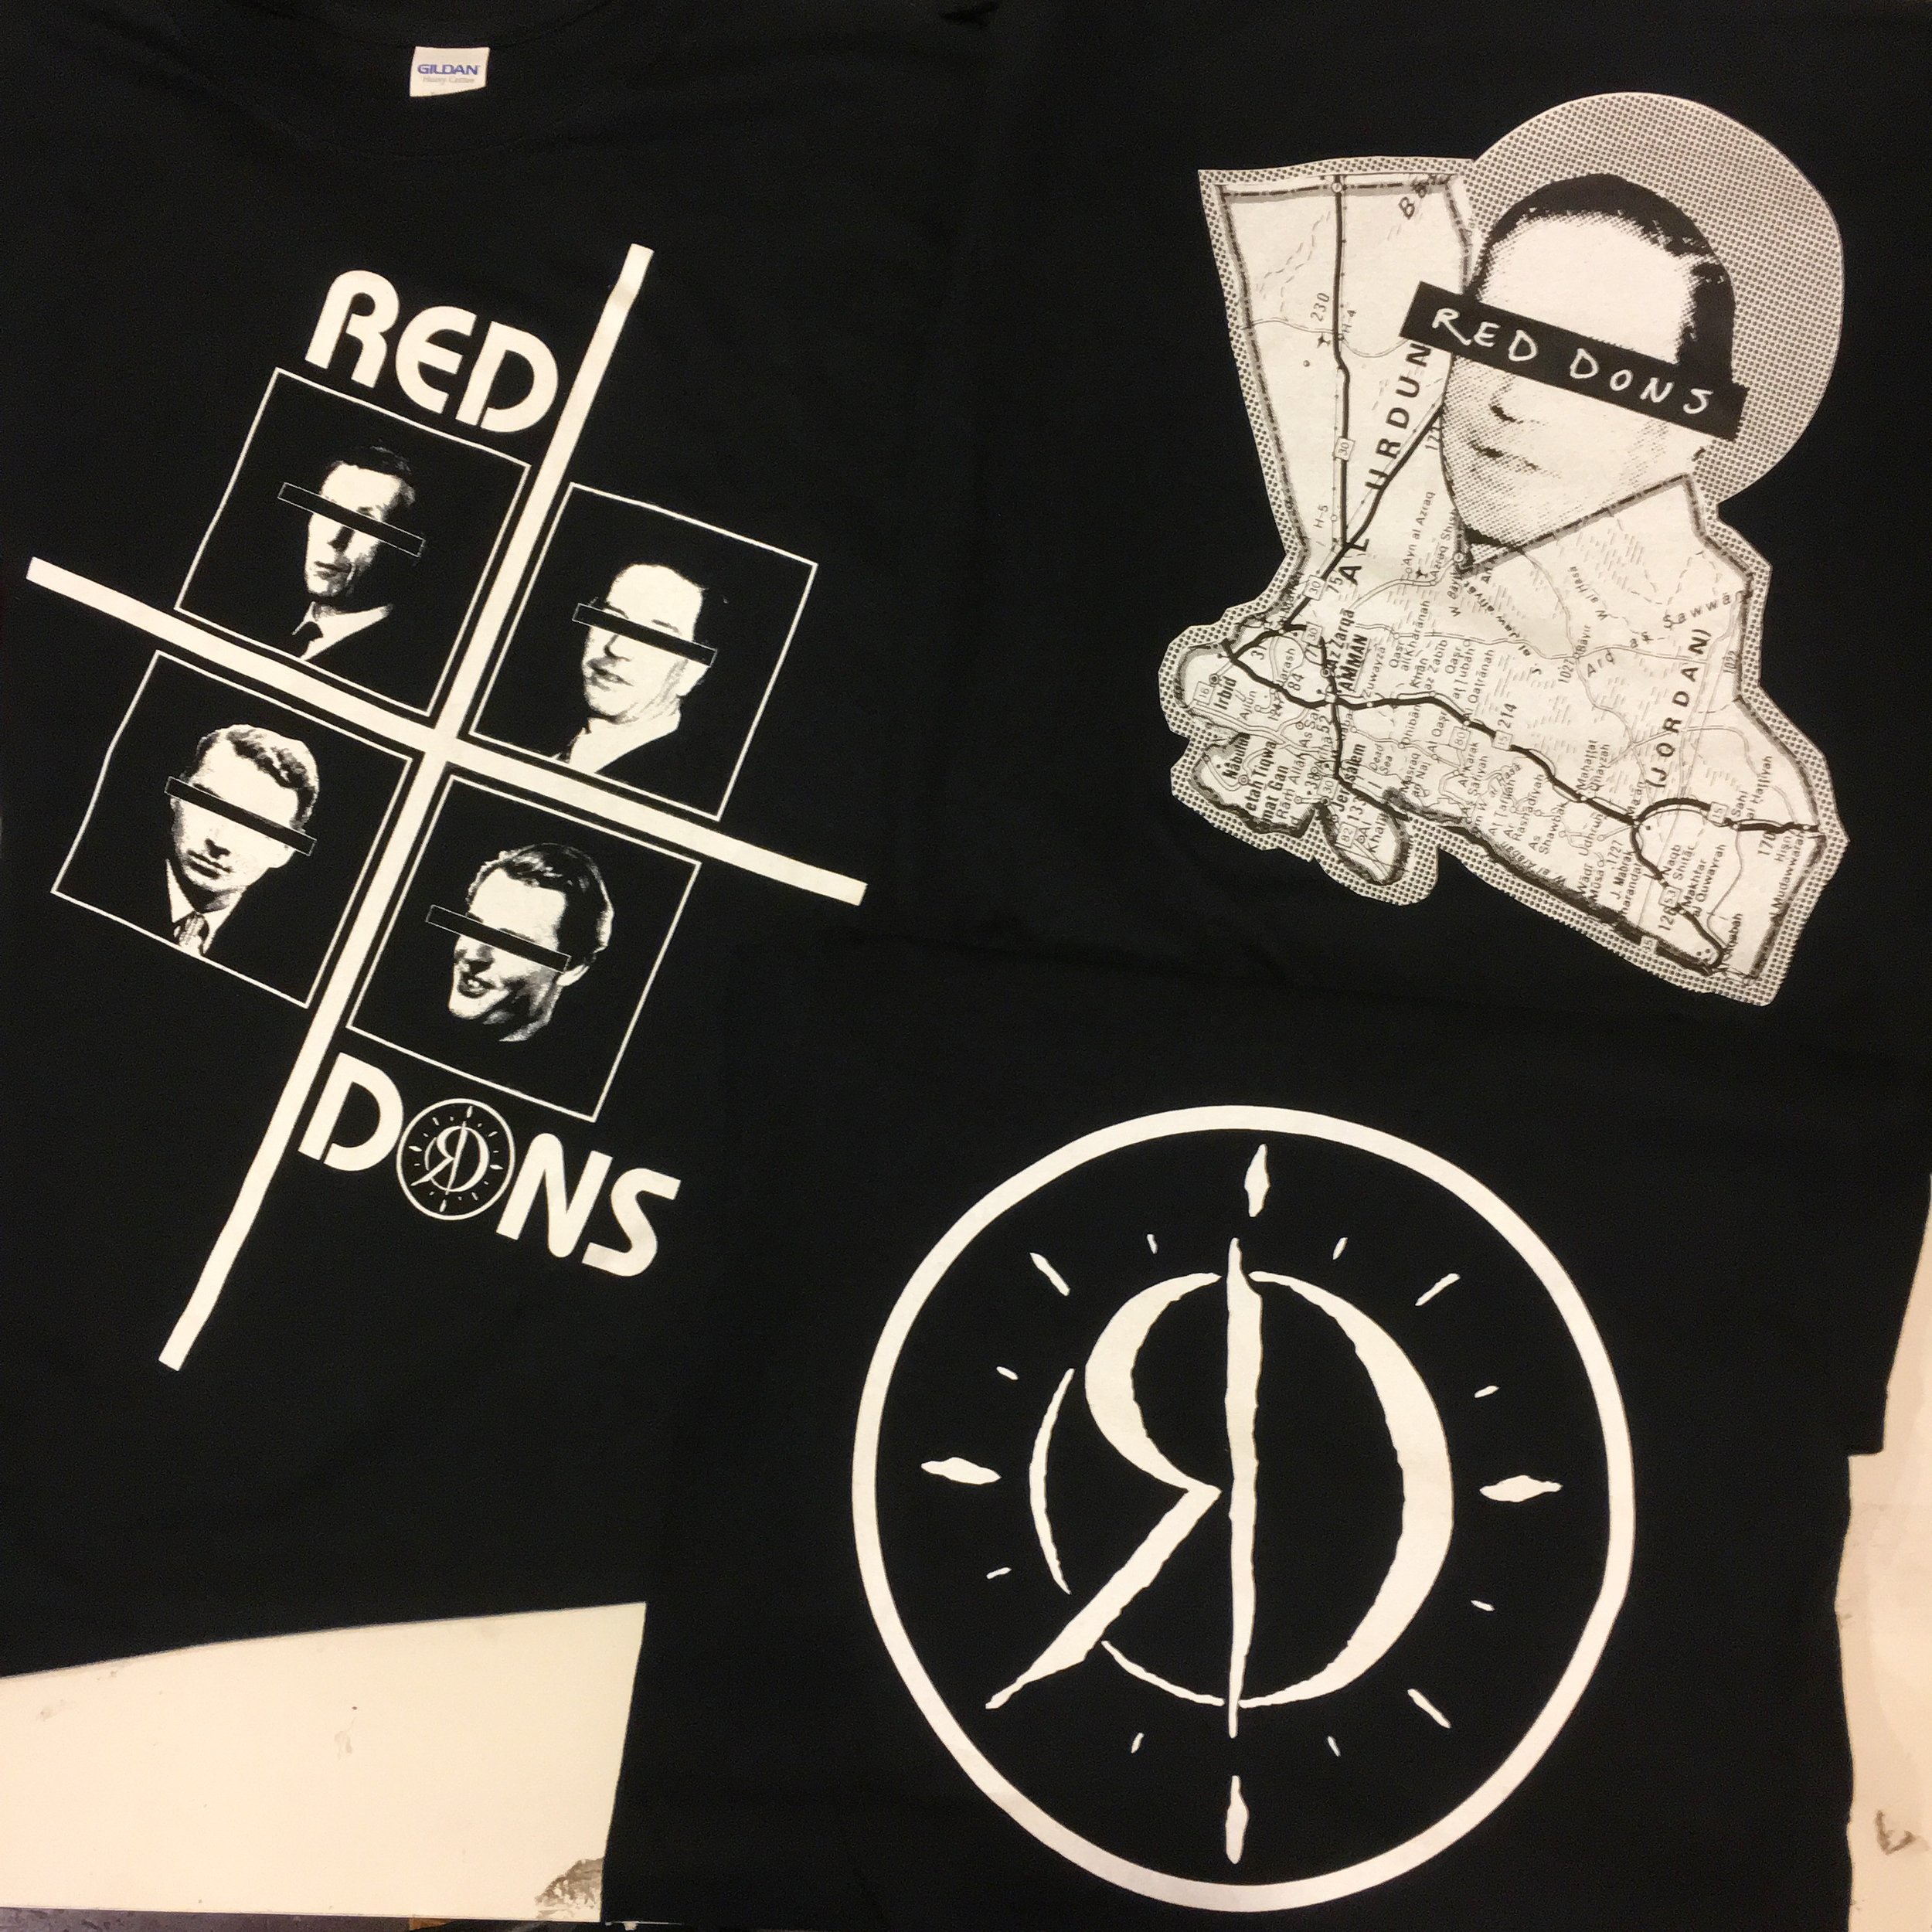  3 designs printed for Red Dons from Portland, OR 